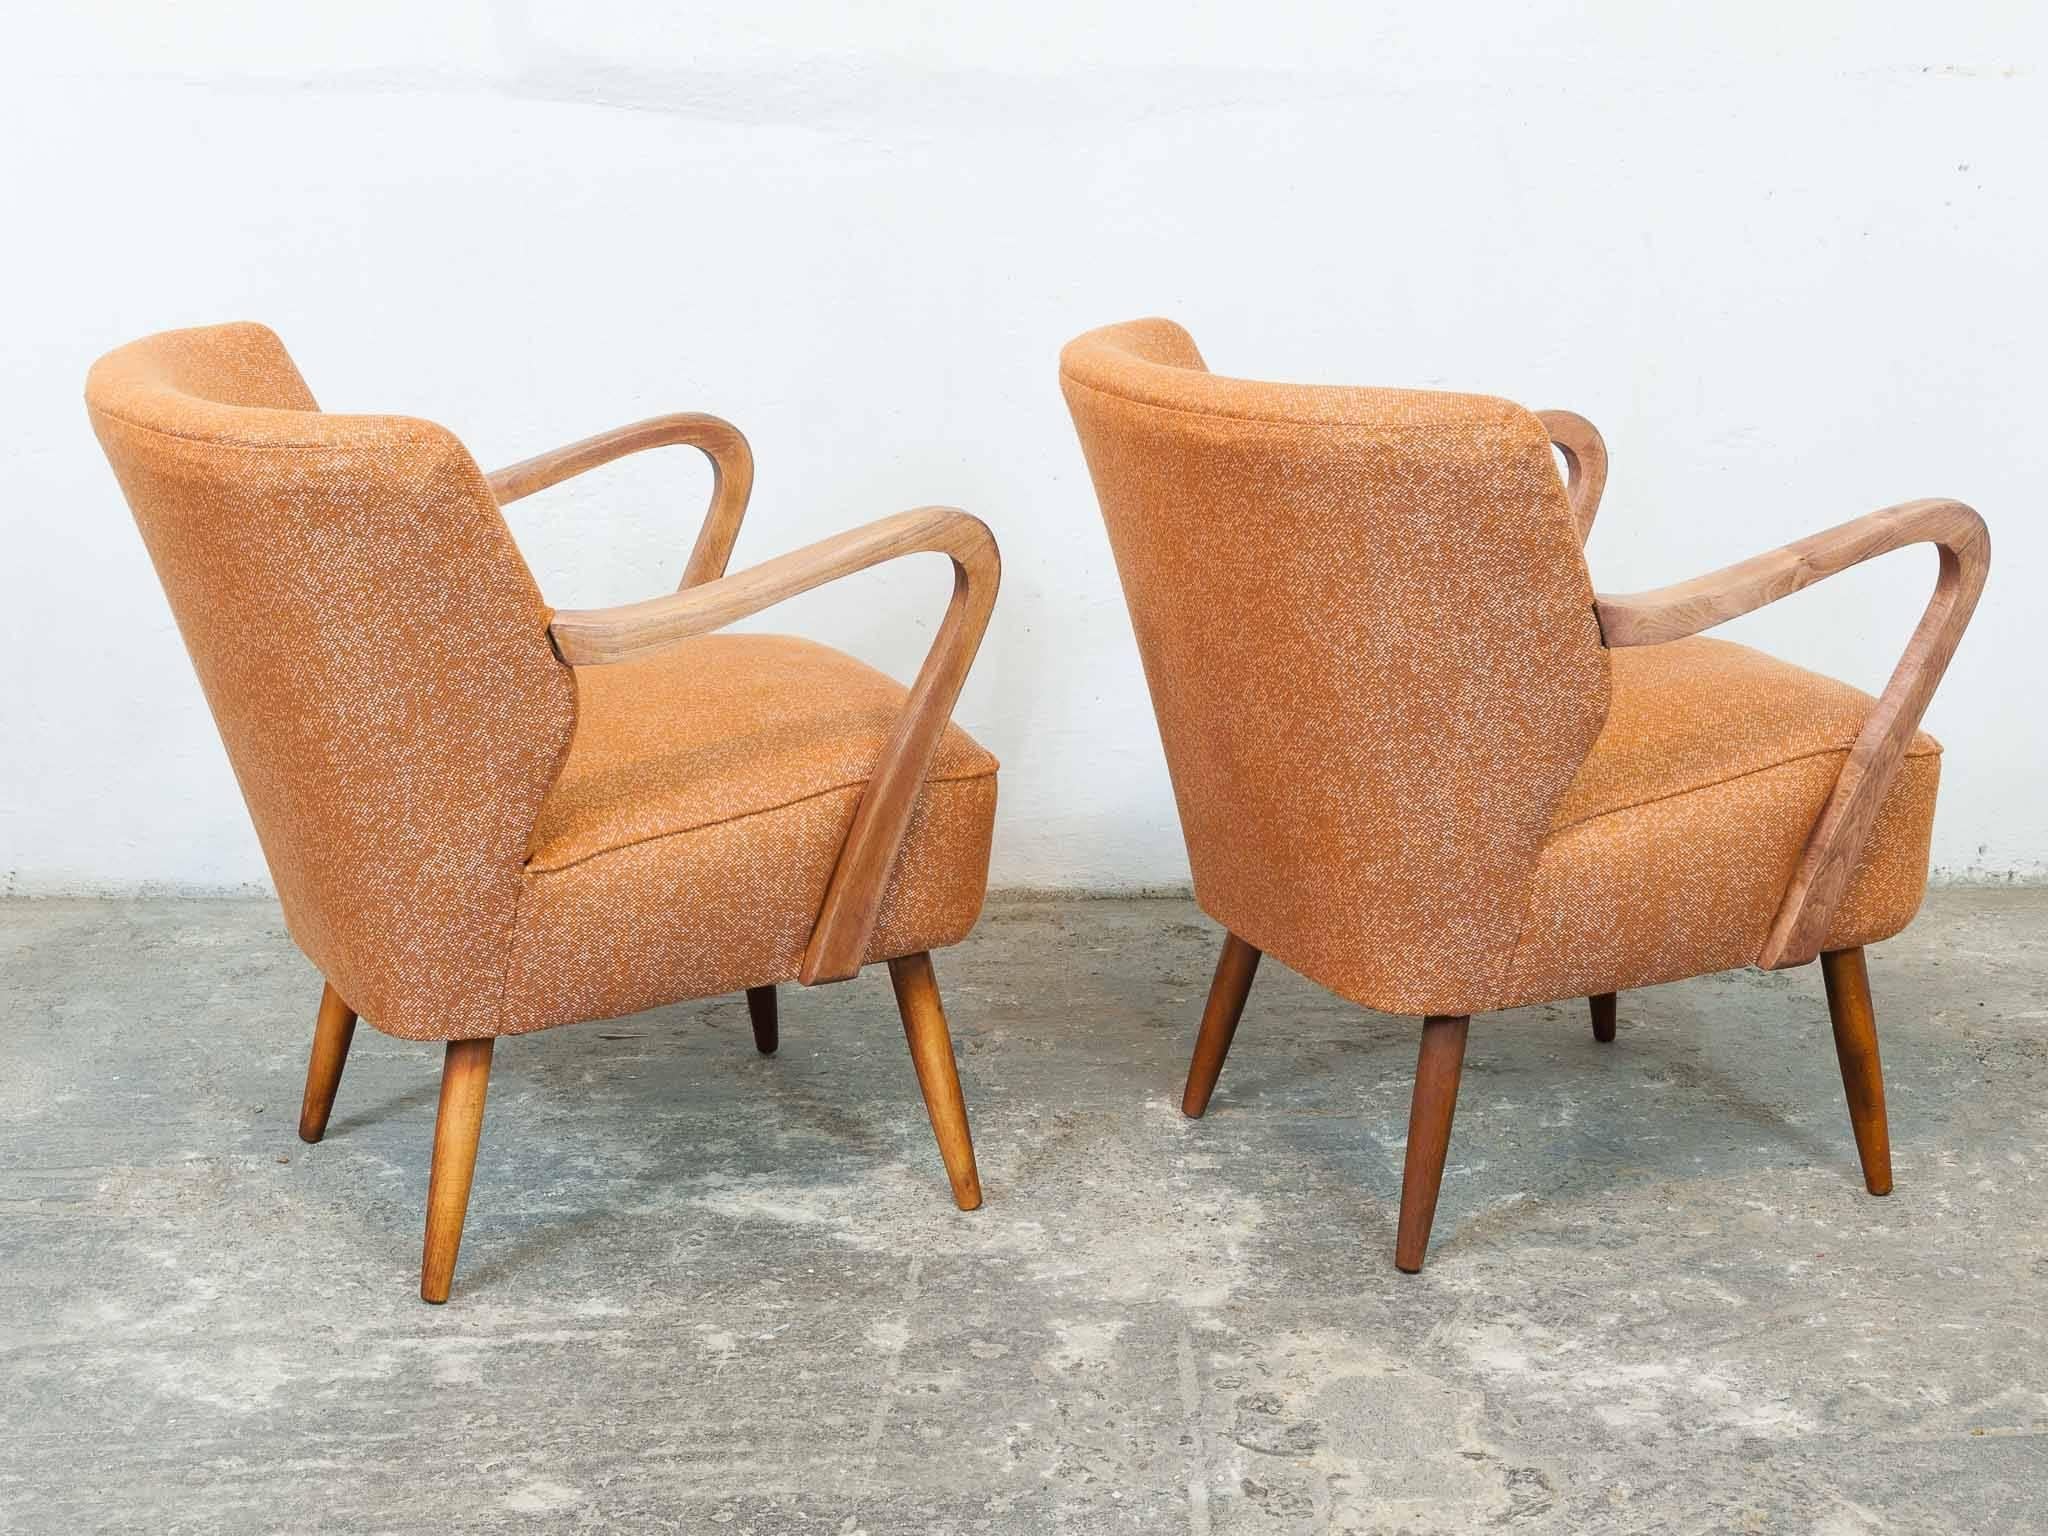 French Pair of 1940s Vintage Midcentury Cocktail Chairs in Astro Orange Fabric